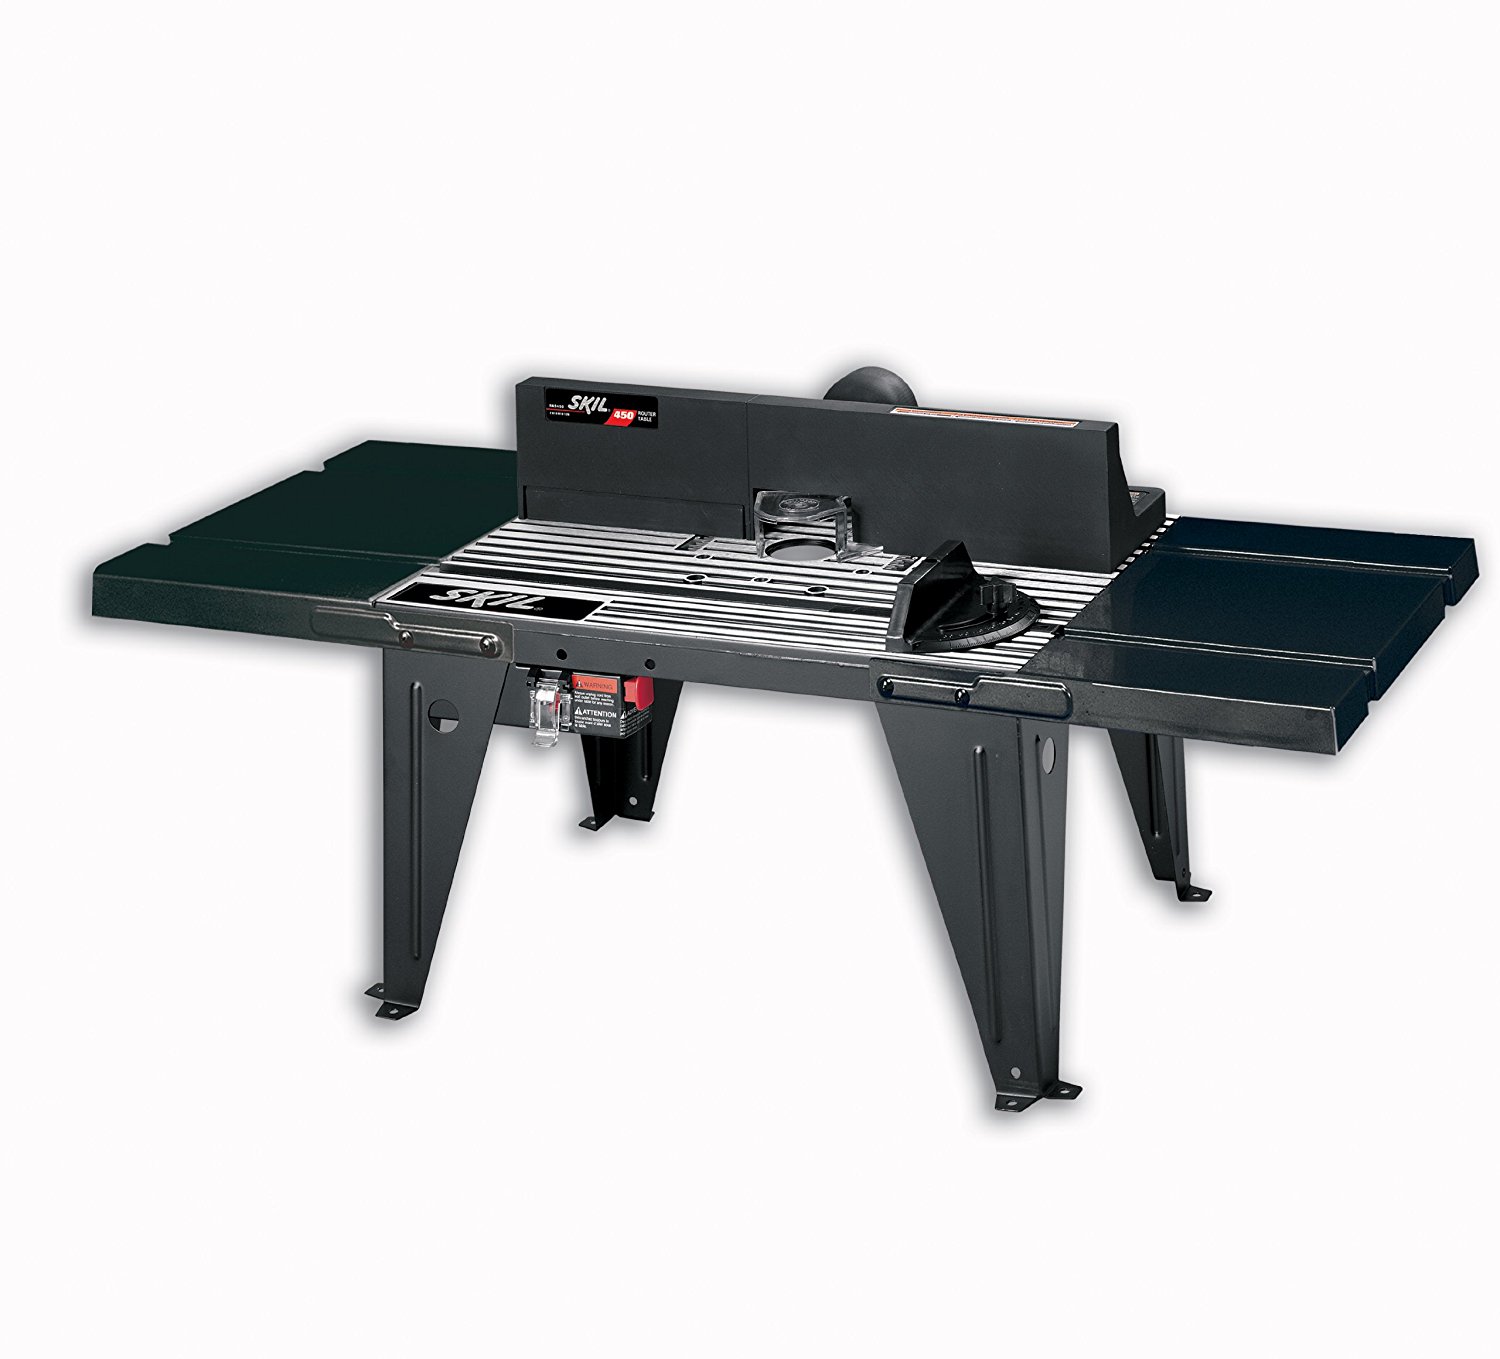 SKIL RAS450 Benchtop Router Table reviews